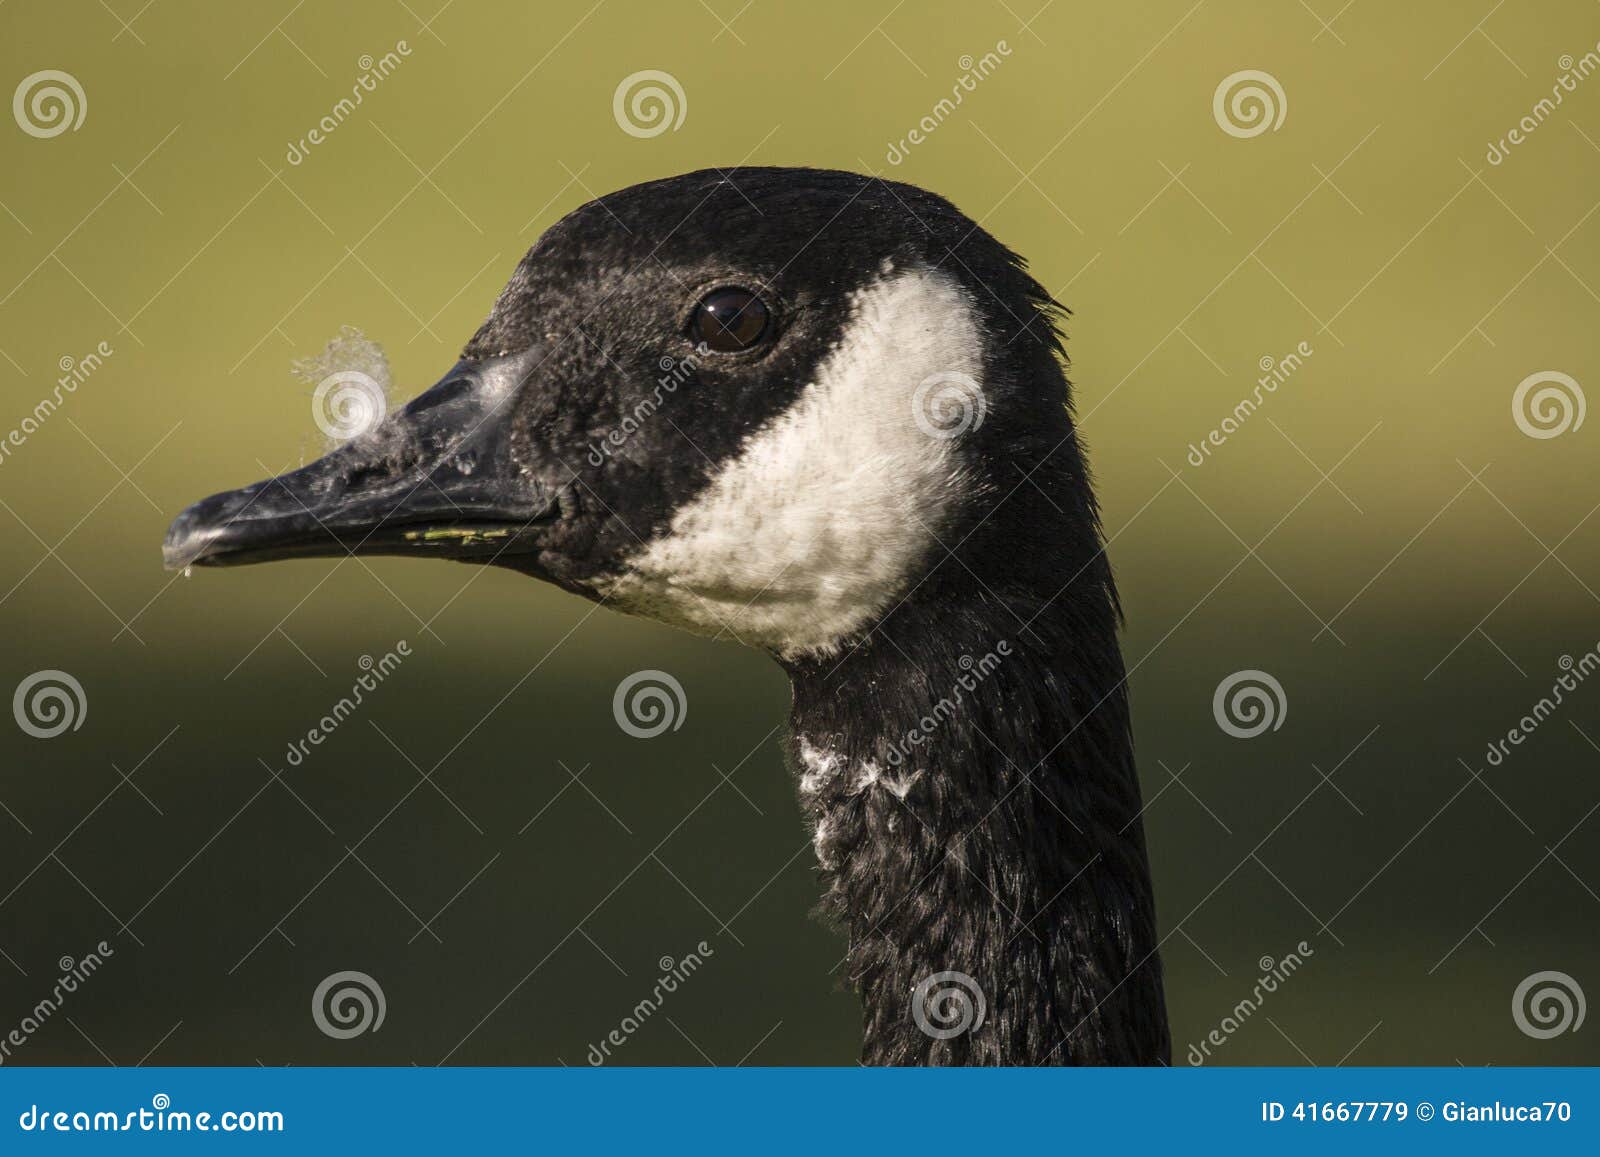 Canadian Goose Head stock image. Image of goose, wing - 41667779